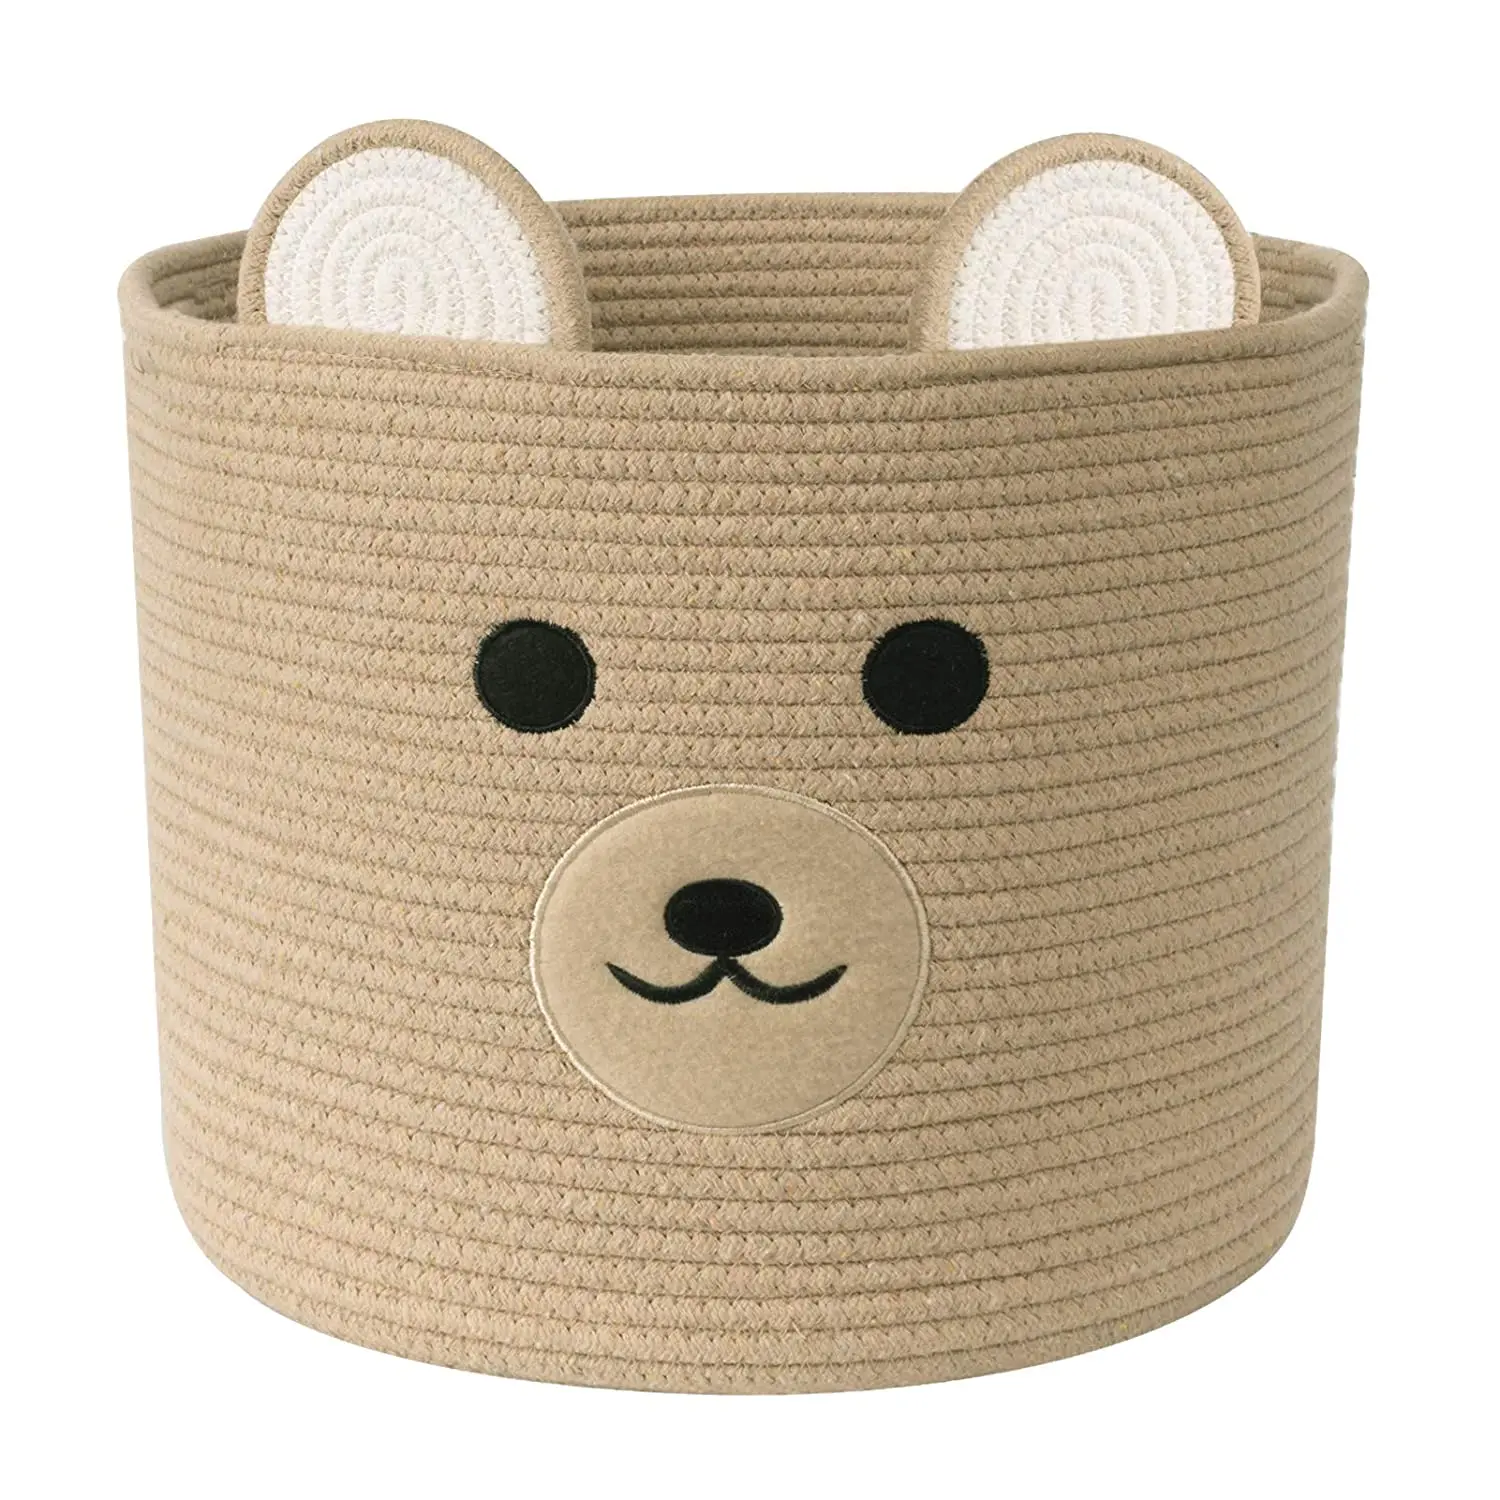 

Baby Laundry Basket Cartoon Bear Pattern Decorative Cotton Rope Toy Storage Basket Woven Baby Nursery Hamper with Animals Patter, Brown